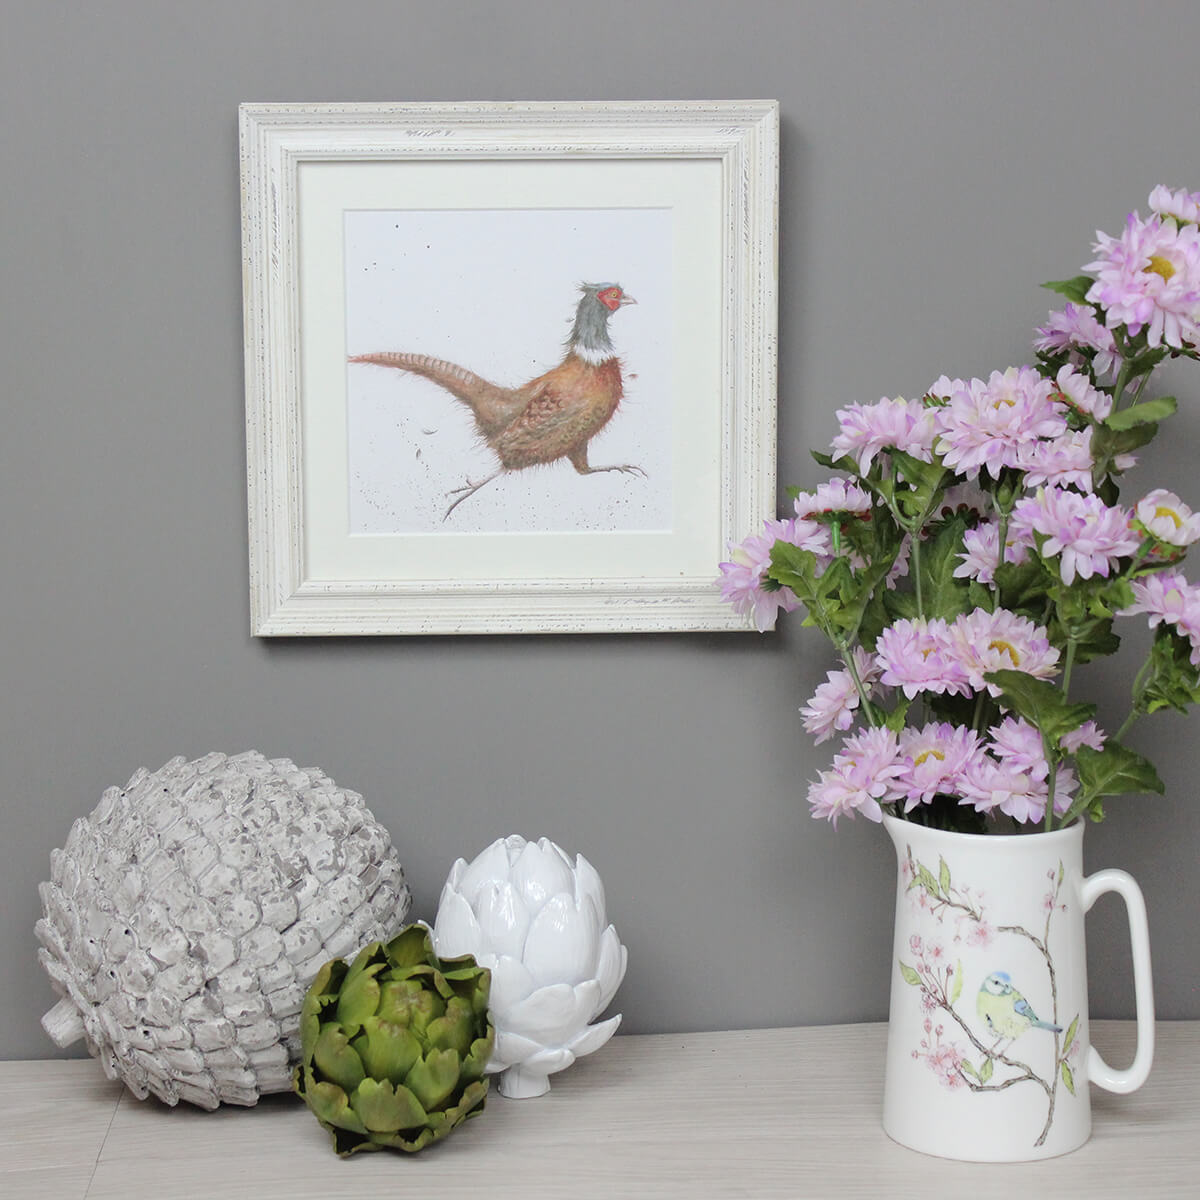 Wrendale Pheasant Picture Game Bird White Framed Card